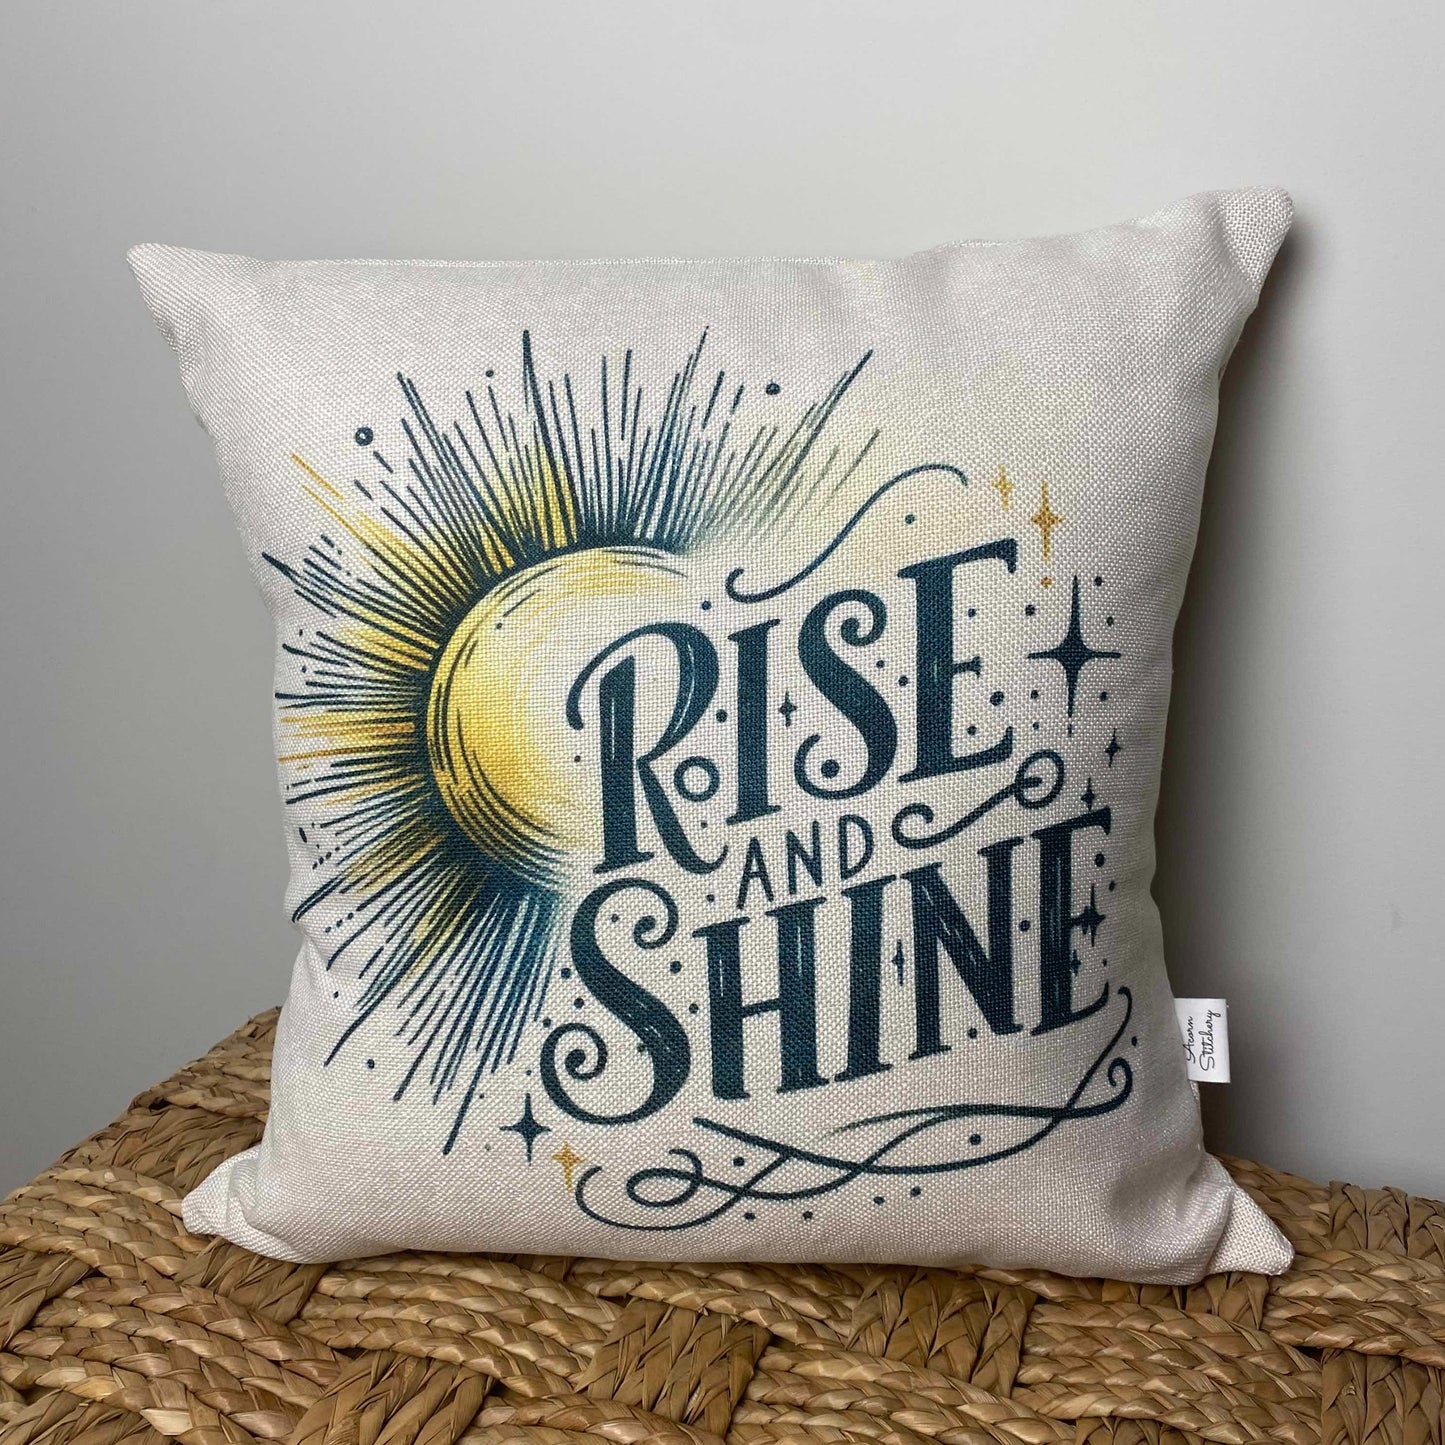 Rise And Shine pillow 18" x 18"